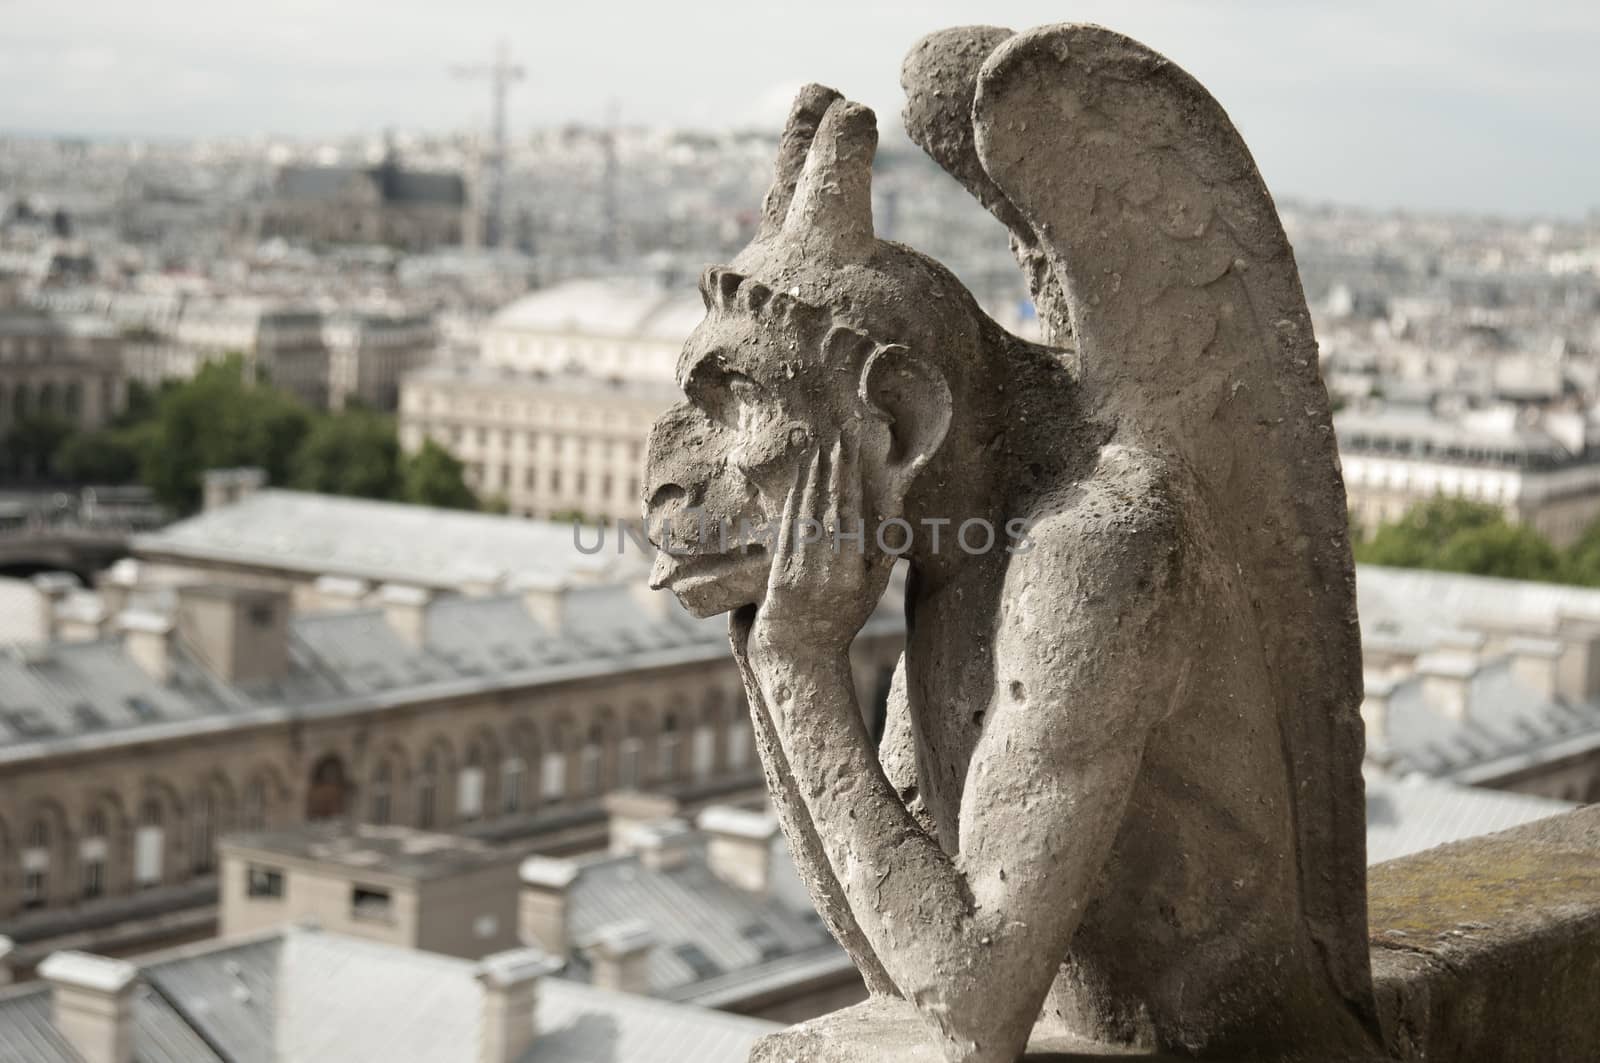 One of Notre-Dame's well known gargoyle statues.